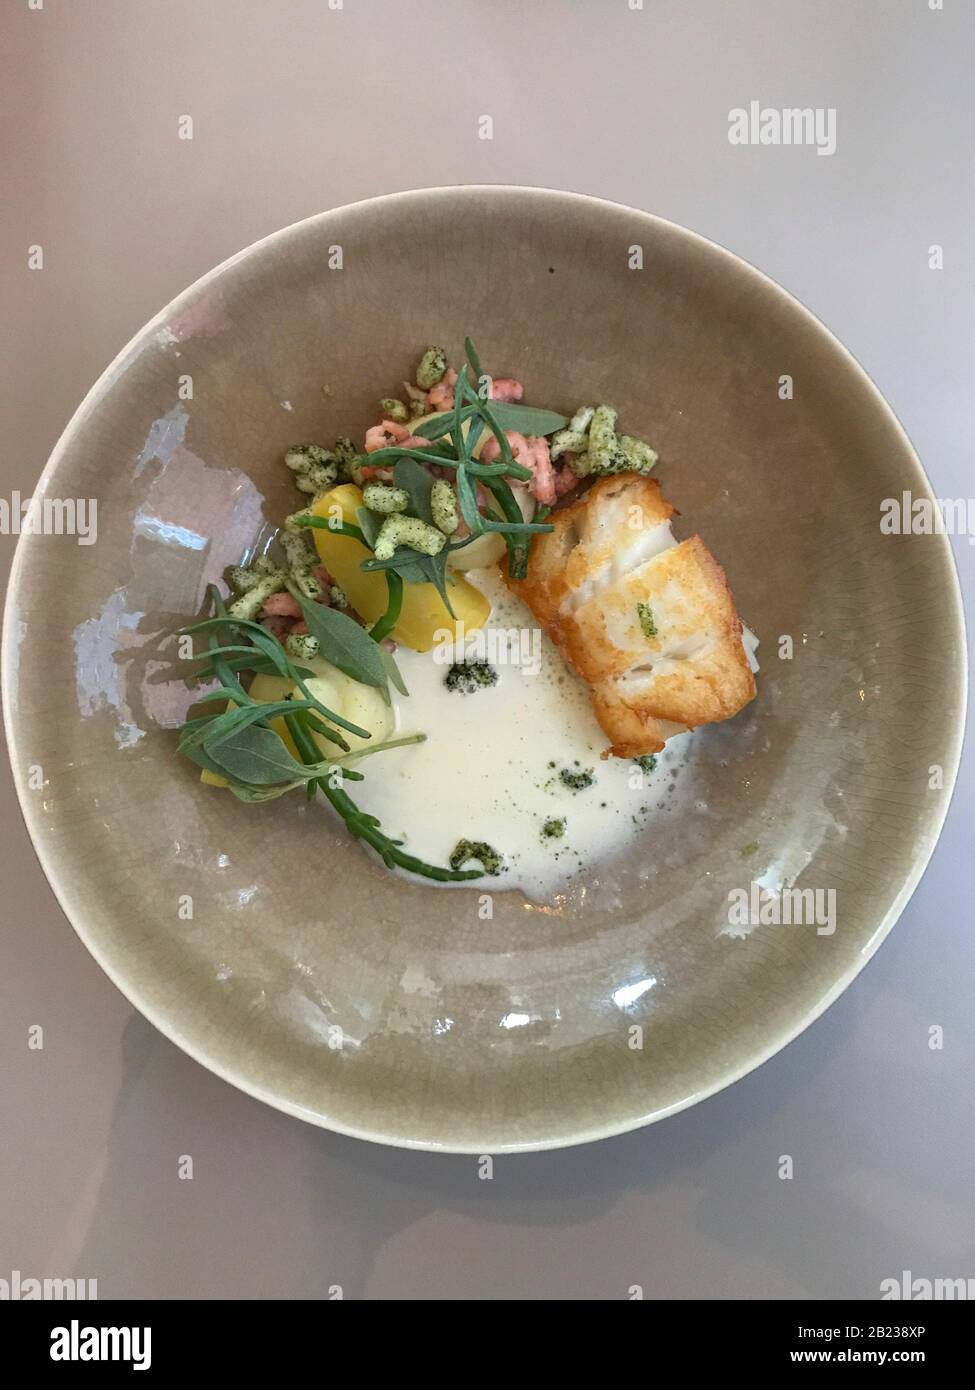 First course of fish with herbs and shrimps in a bowl Stock Photo